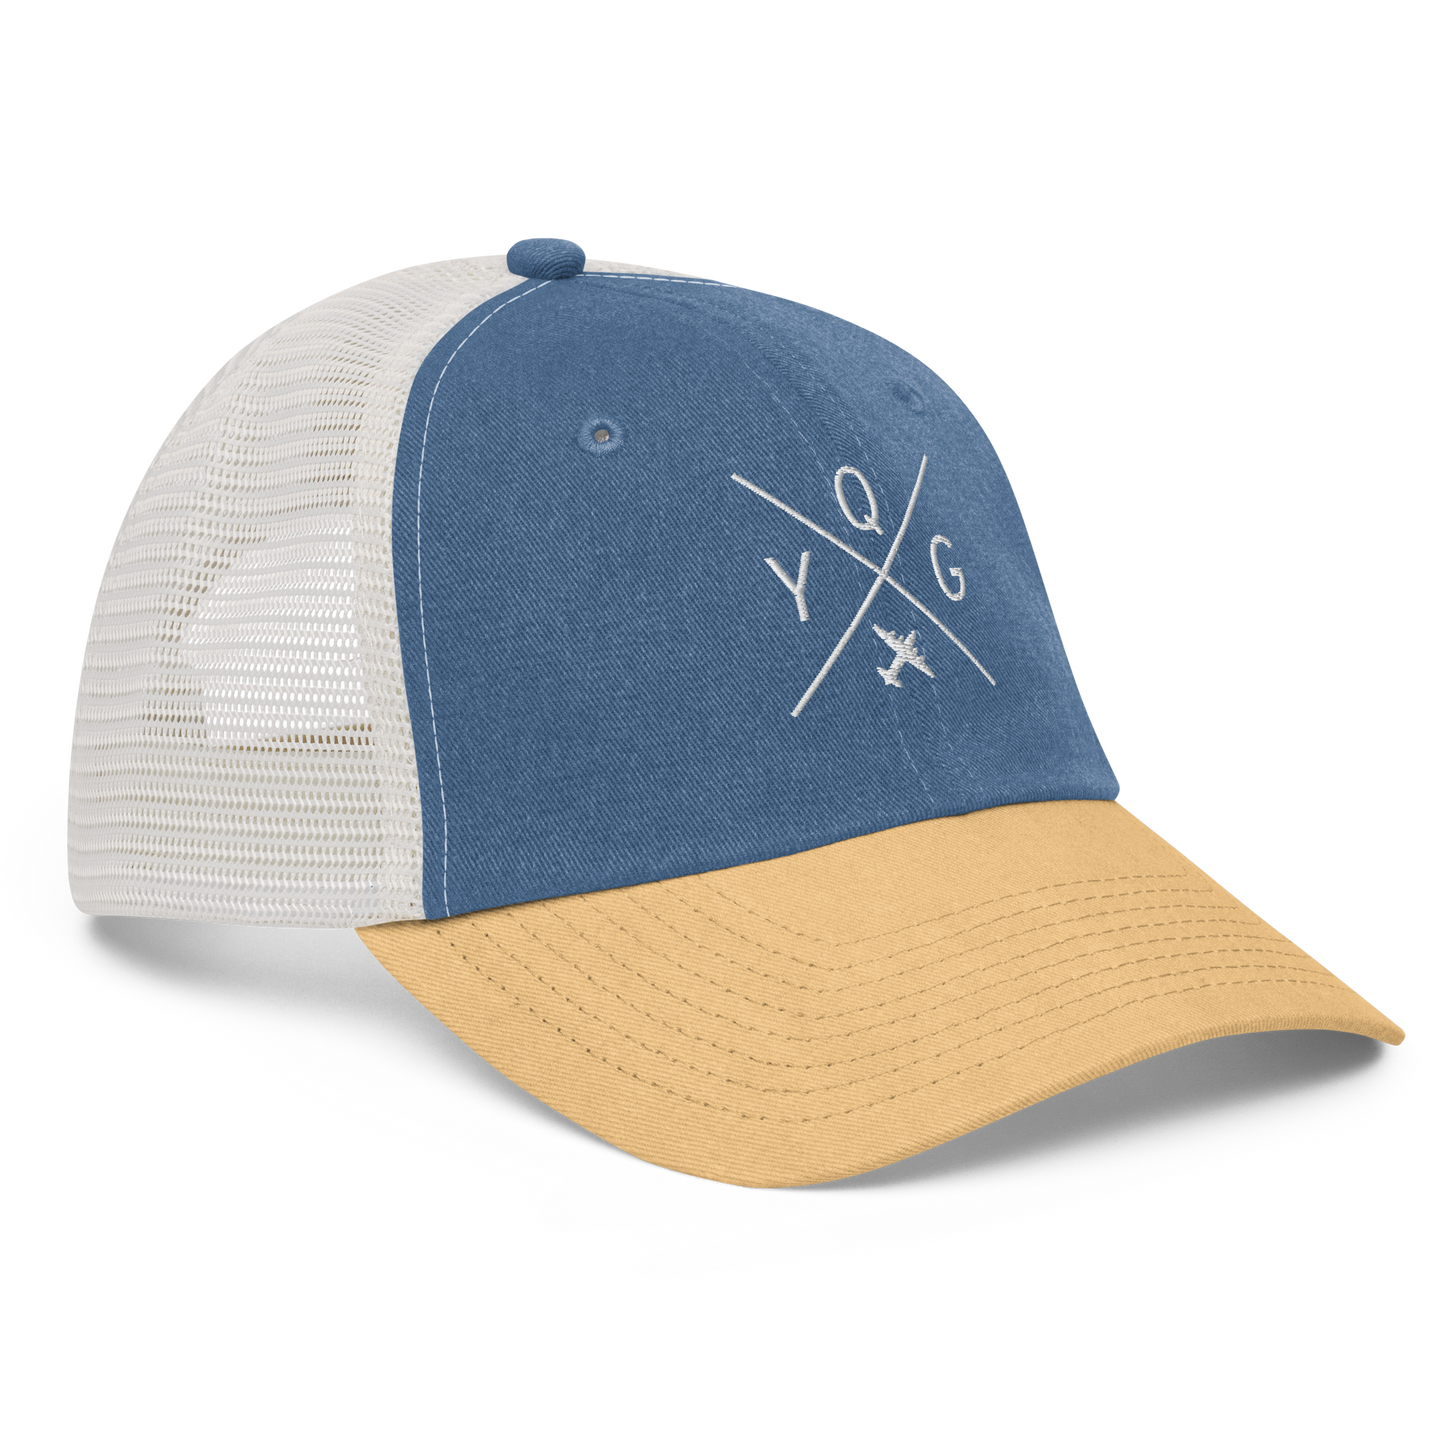 YHM Designs - YQG Windsor Pigment-Dyed Trucker Cap - Crossed-X Design with Airport Code and Vintage Propliner - White Embroidery - Image 18